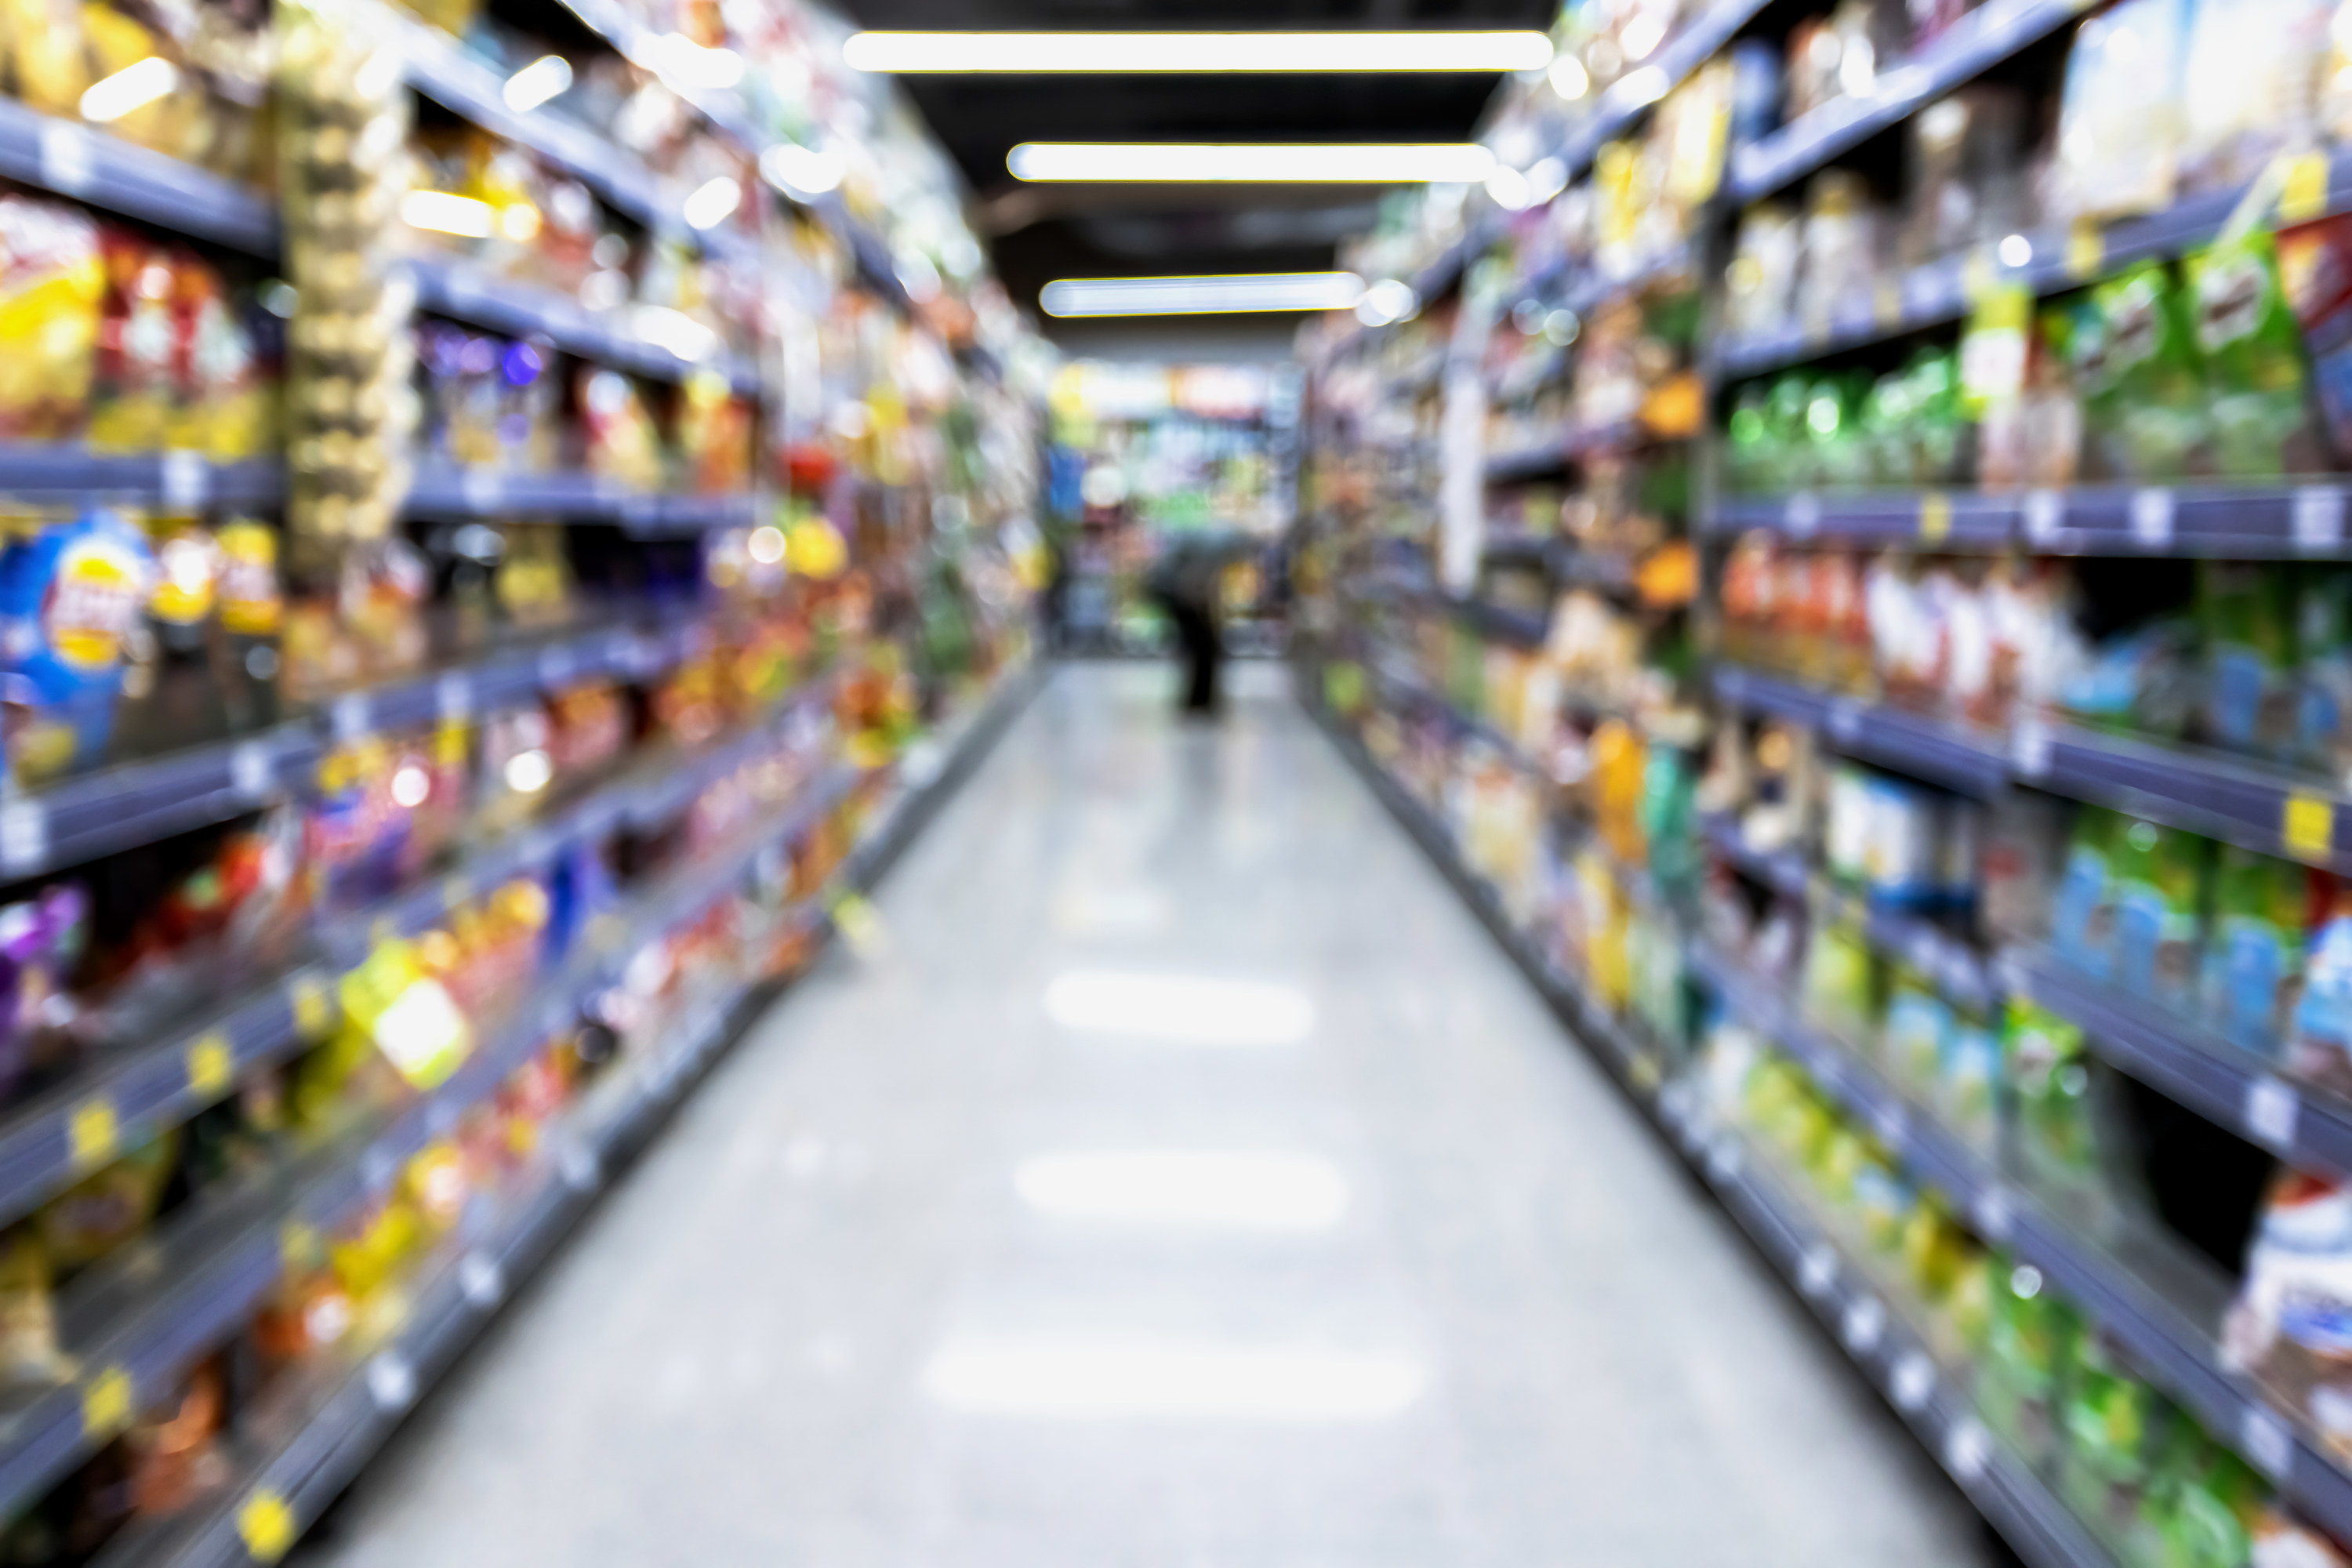 blurry view of a supermarket aisle with snacks